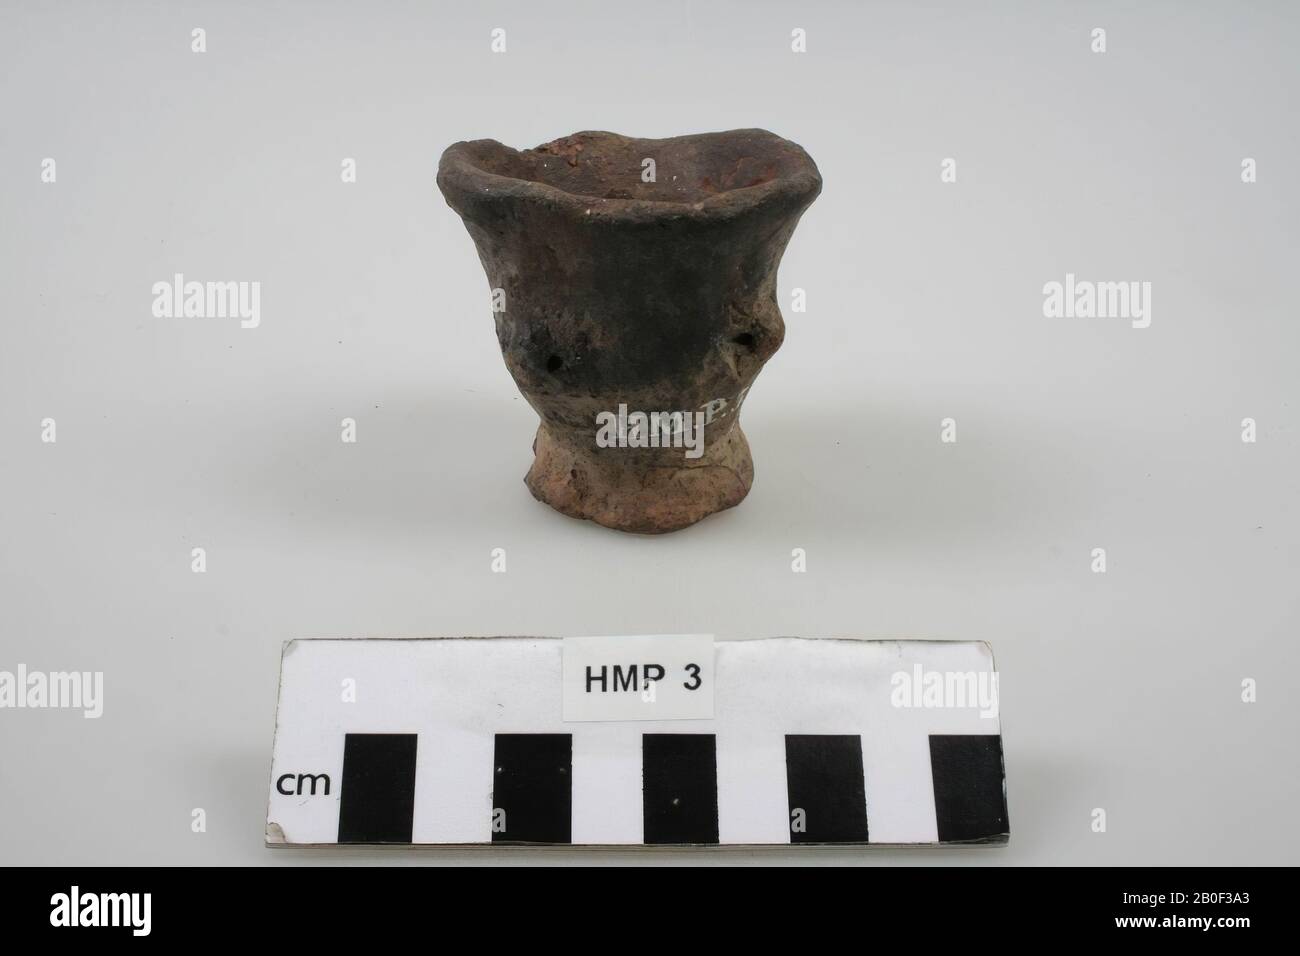 Pot with three small ears, cup-shaped, made of hand-formed earthenware. The red color comes from the red earth that a shipper's wife kept in it. Piece of the rim is missing, parts of the foot are missing, pot, earthenware (hand shaped), h: 6.5 cm, diam: 6.5 cm, roman, Netherlands, Friesland, Leeuwarderadeel, Hijum Stock Photo